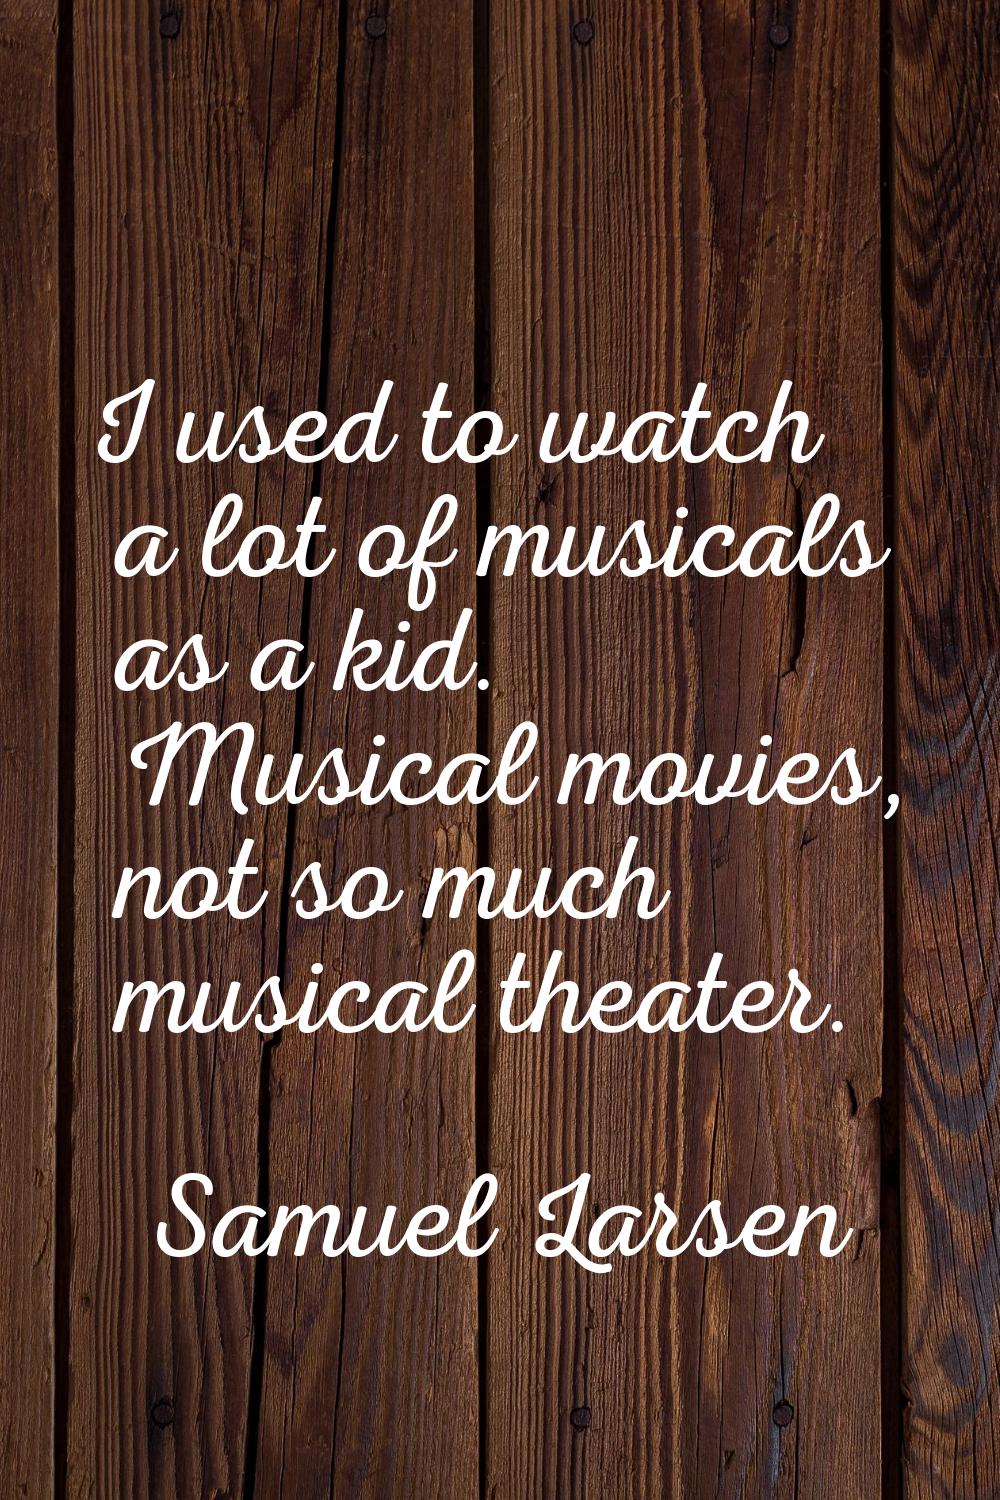 I used to watch a lot of musicals as a kid. Musical movies, not so much musical theater.